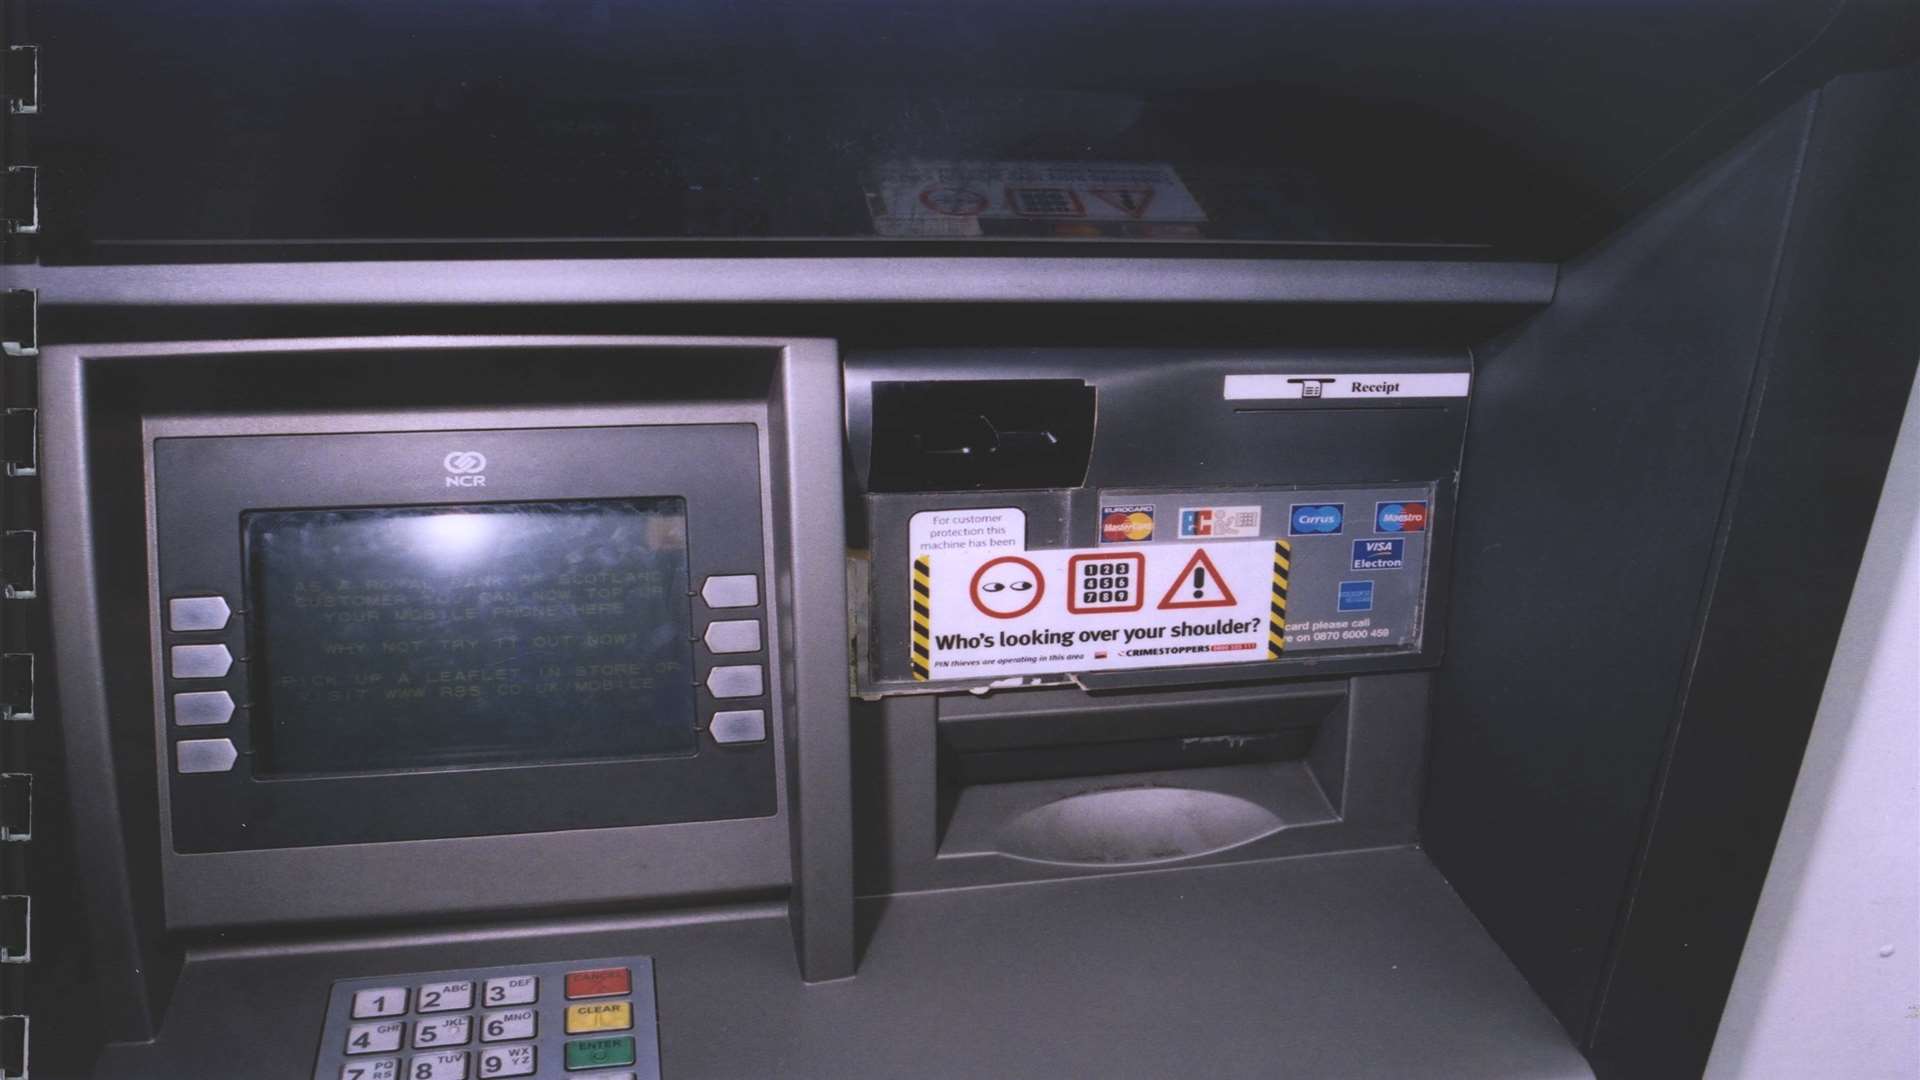 People have been warned to be on their guard when using cash machines after tampering